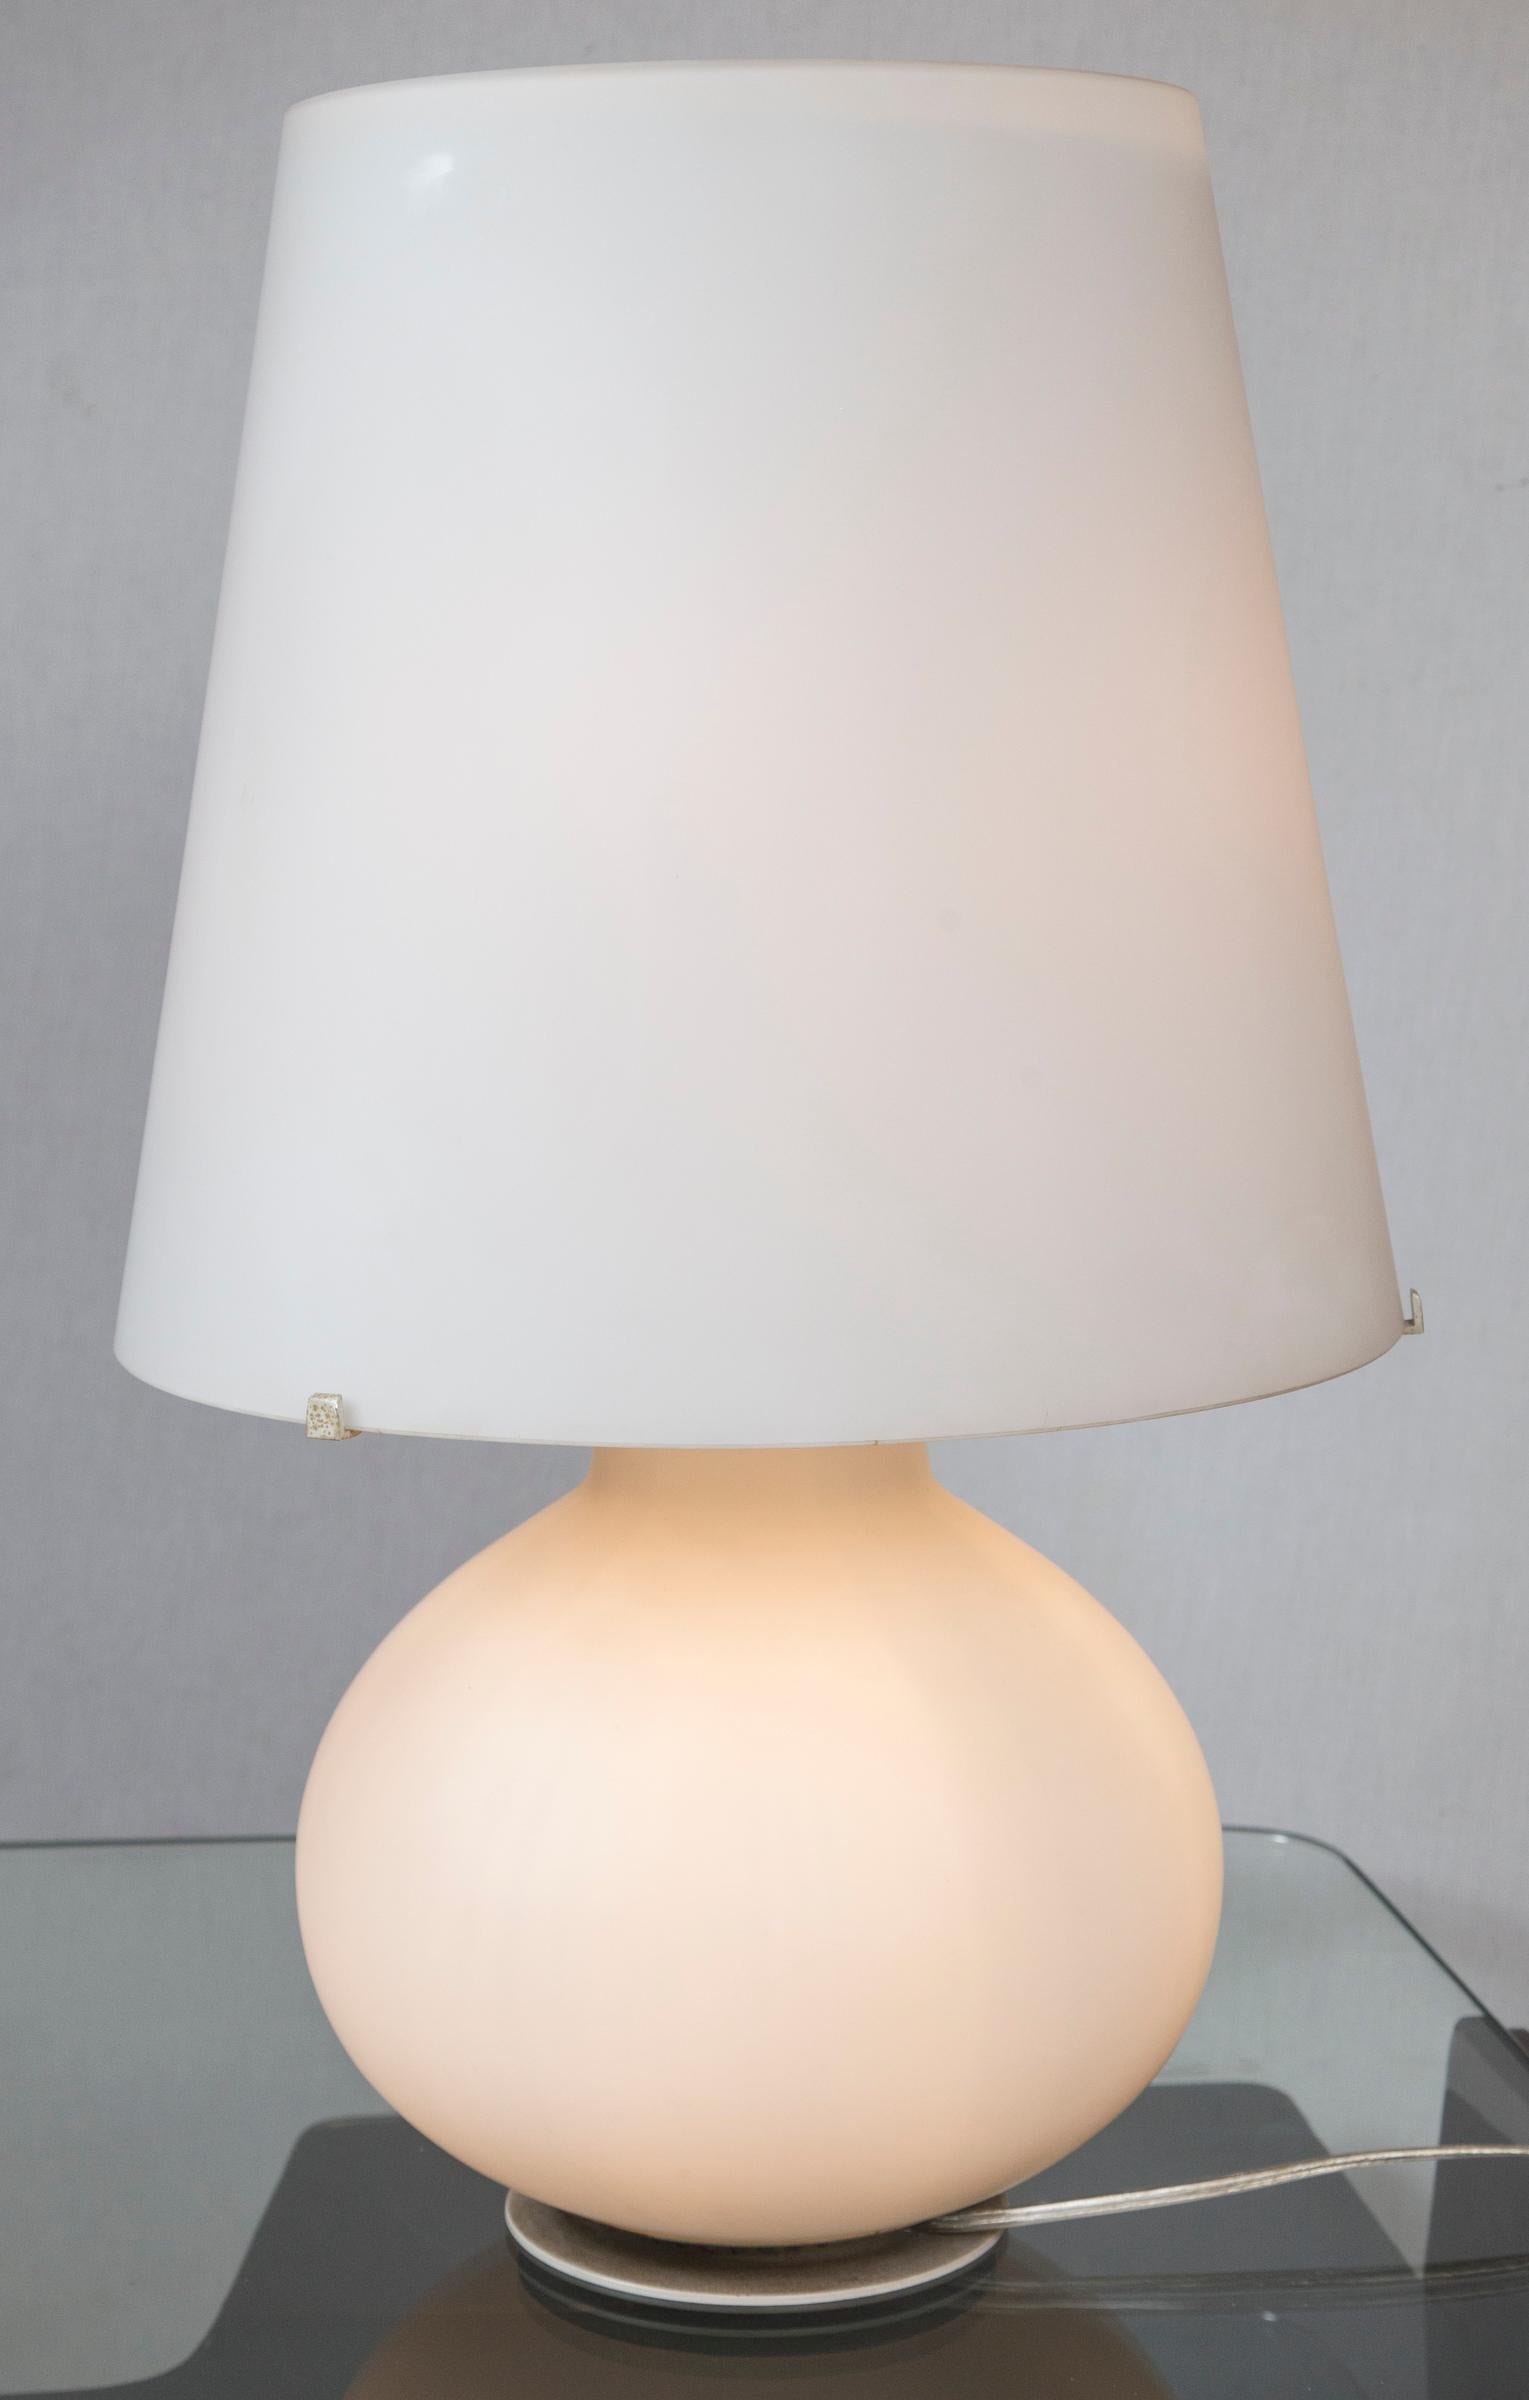 Period single lamp in a satin white blown glass by Max Ingrand for Fontana Arte, with three lighting elements, one placed in the base of the lamp and two placed in the shade and as uplight
largest table lamp model 1853 of three sizes made in